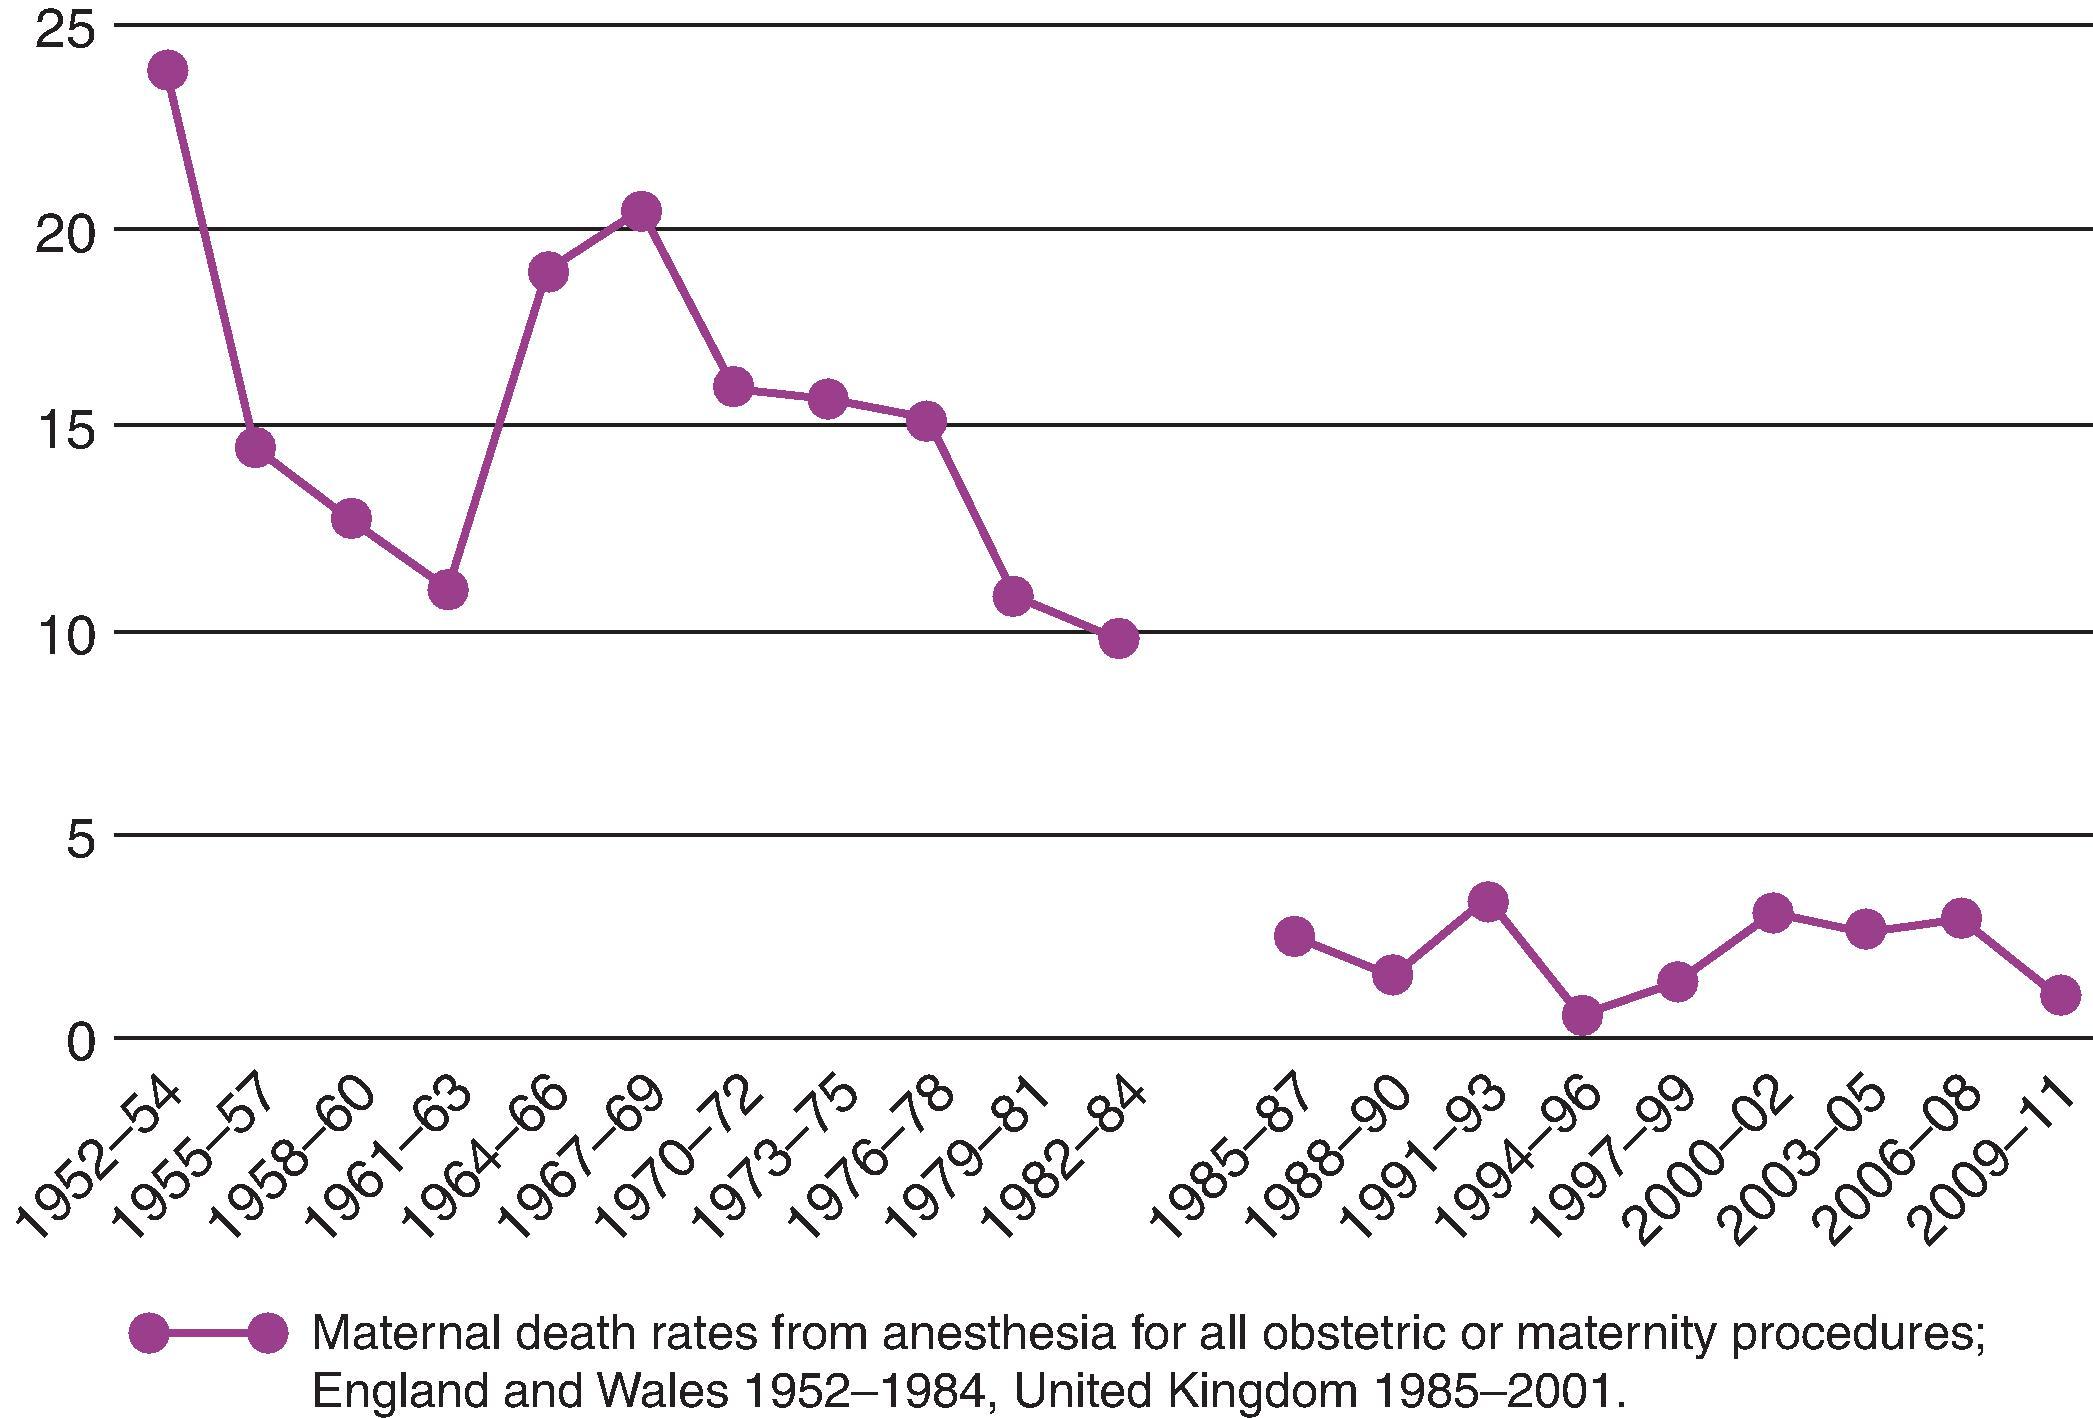 Fig. 37.3, Decline in maternal deaths from anesthesia: England and Wales, United Kingdom (1952–1954 through 2009–2011). (Reproduced with permission from Freedman Rl. Int J Obstet Anesth. 2015;24(2):161–173. Redrawn by Deidre Tomkins, Baylor College of Medicine.)